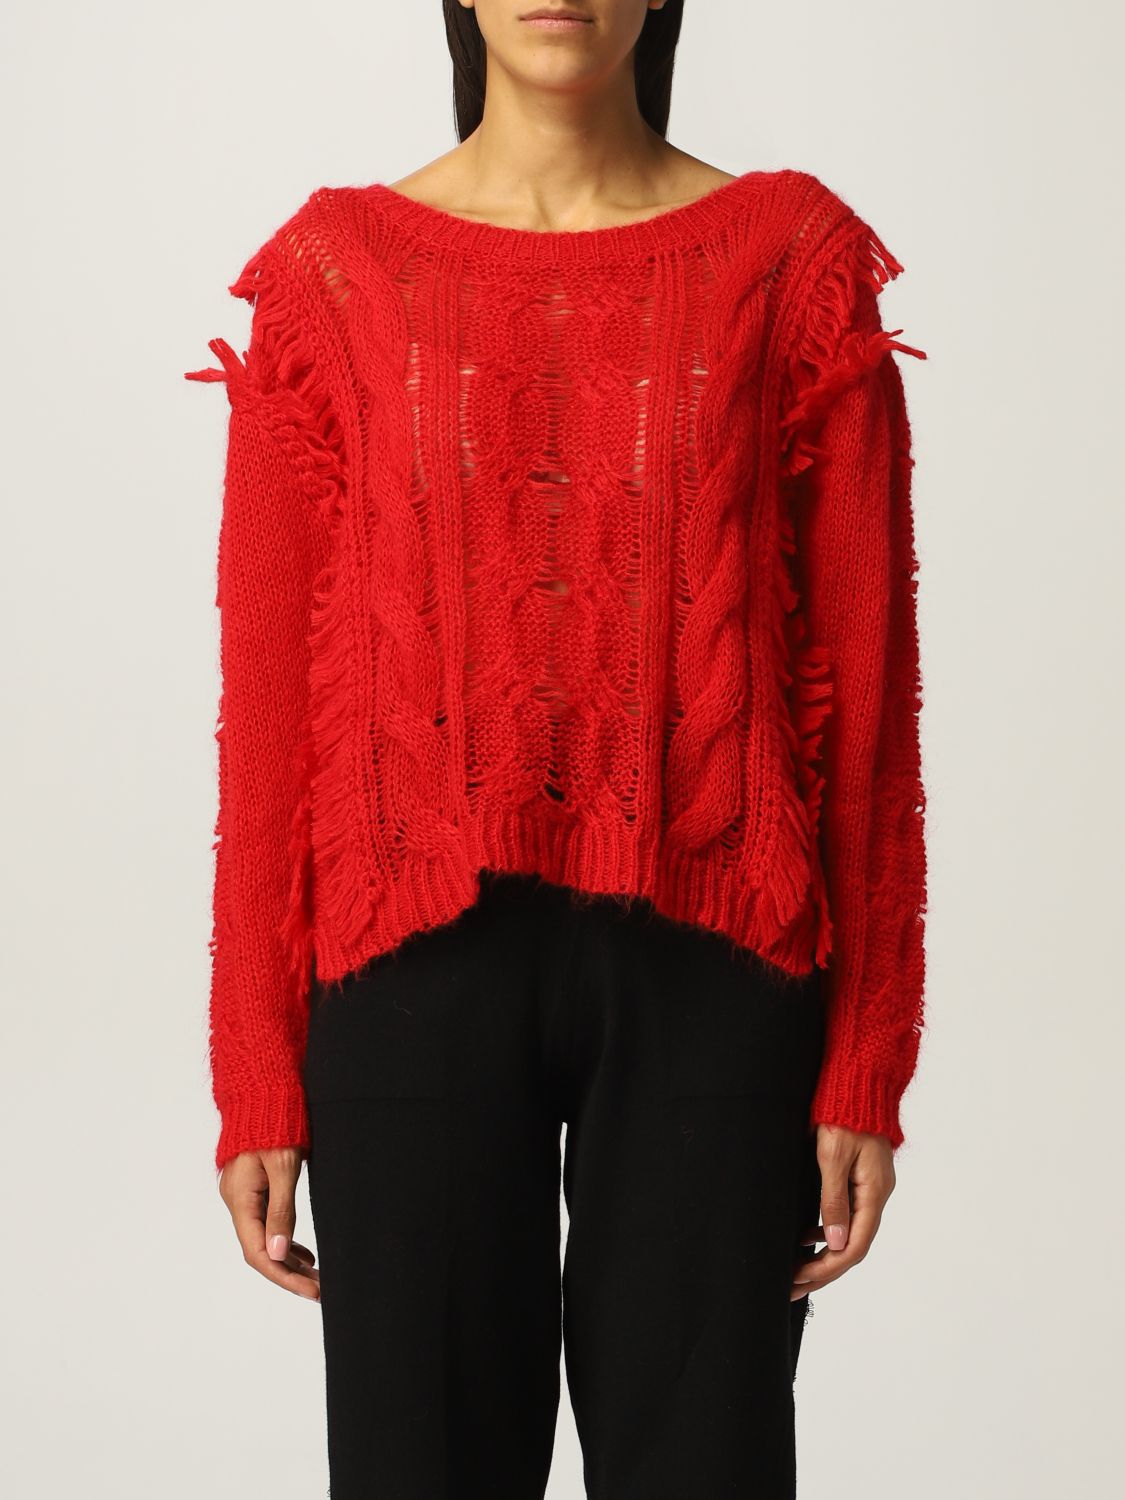 Twinset Twin Set Sweater In Mohair Blend With Fringes Red Twinset Sweater 212tp3410 Online